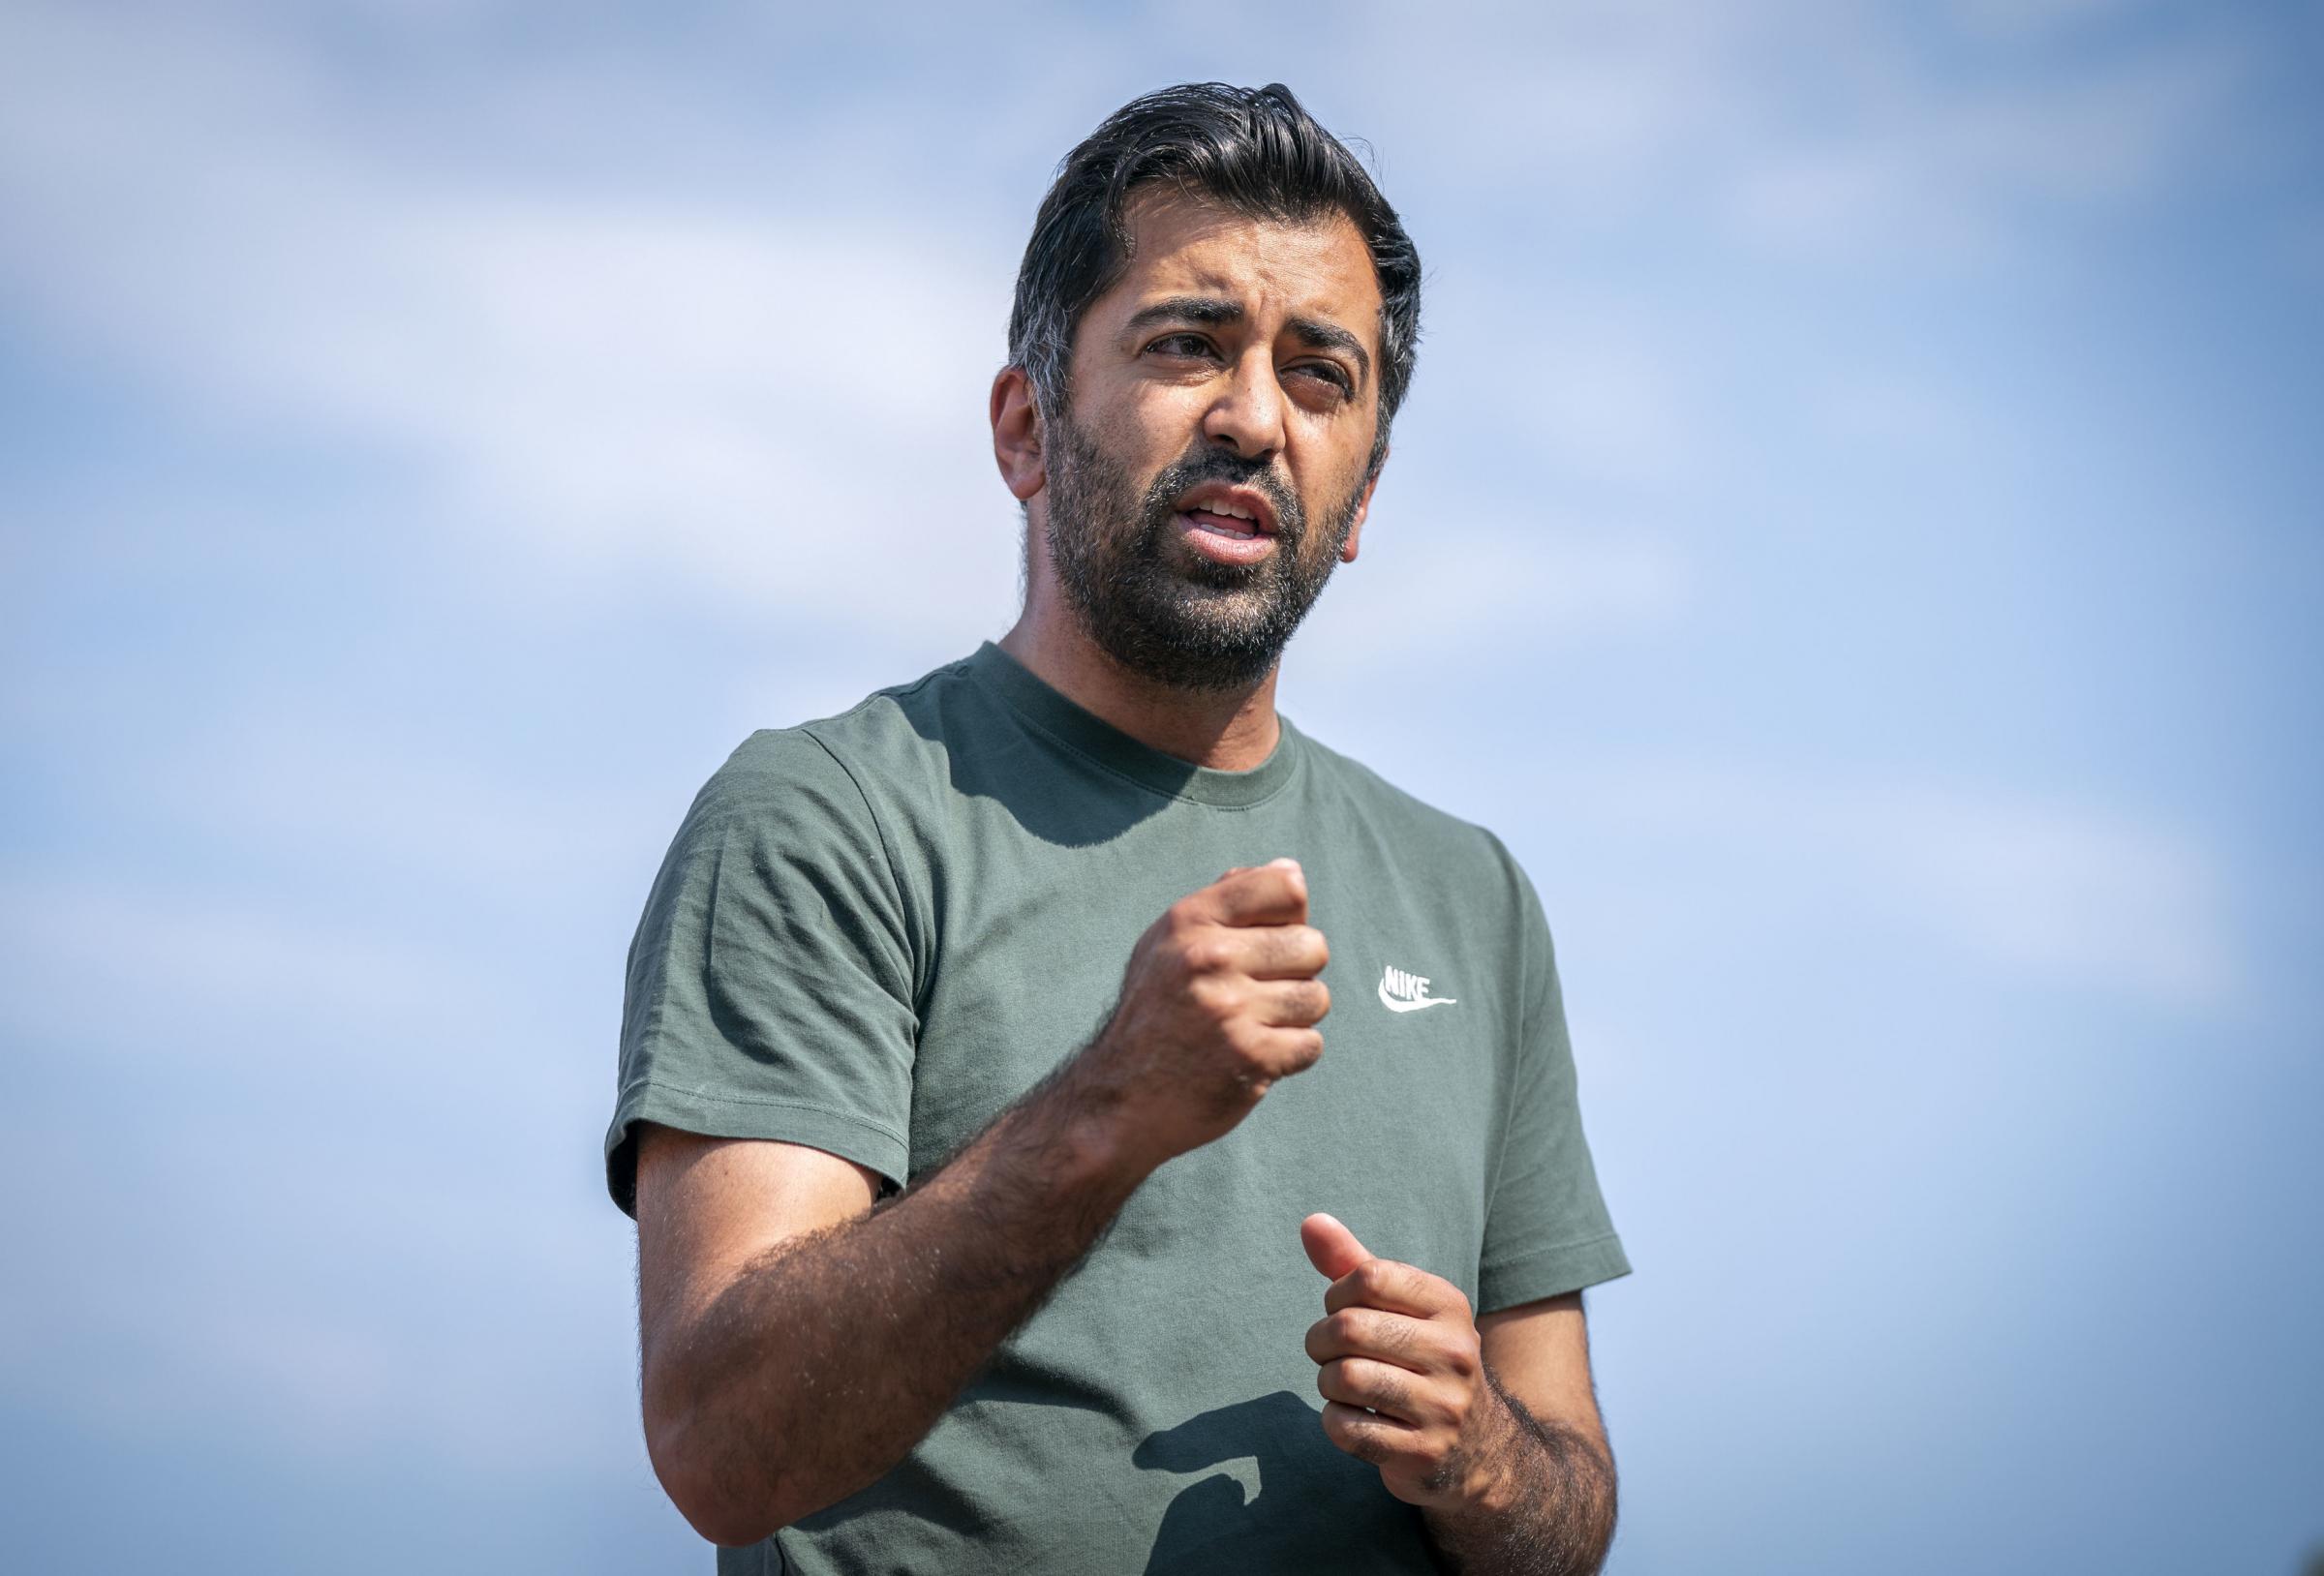 Covid Scotland: Humza Yousaf says indicators are ‘positive’ Scotland is exiting latest wave